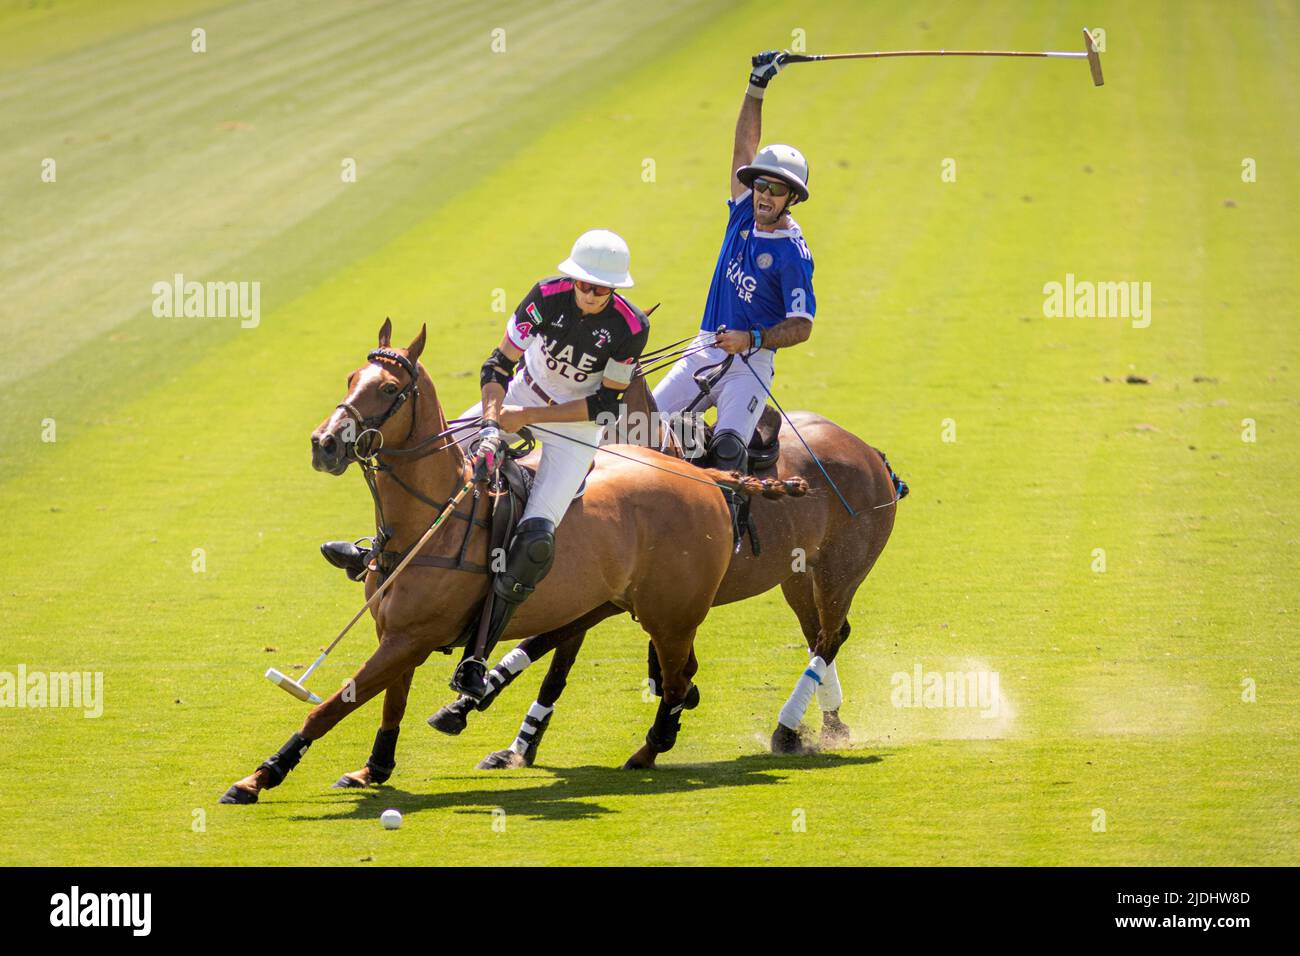 Tomas Beresford of UAE with the ball as Nico Pieres appeals behind at Cowdray Park Polo Club in Midhurst, West Sussex where UAE took on King Power in Stock Photo